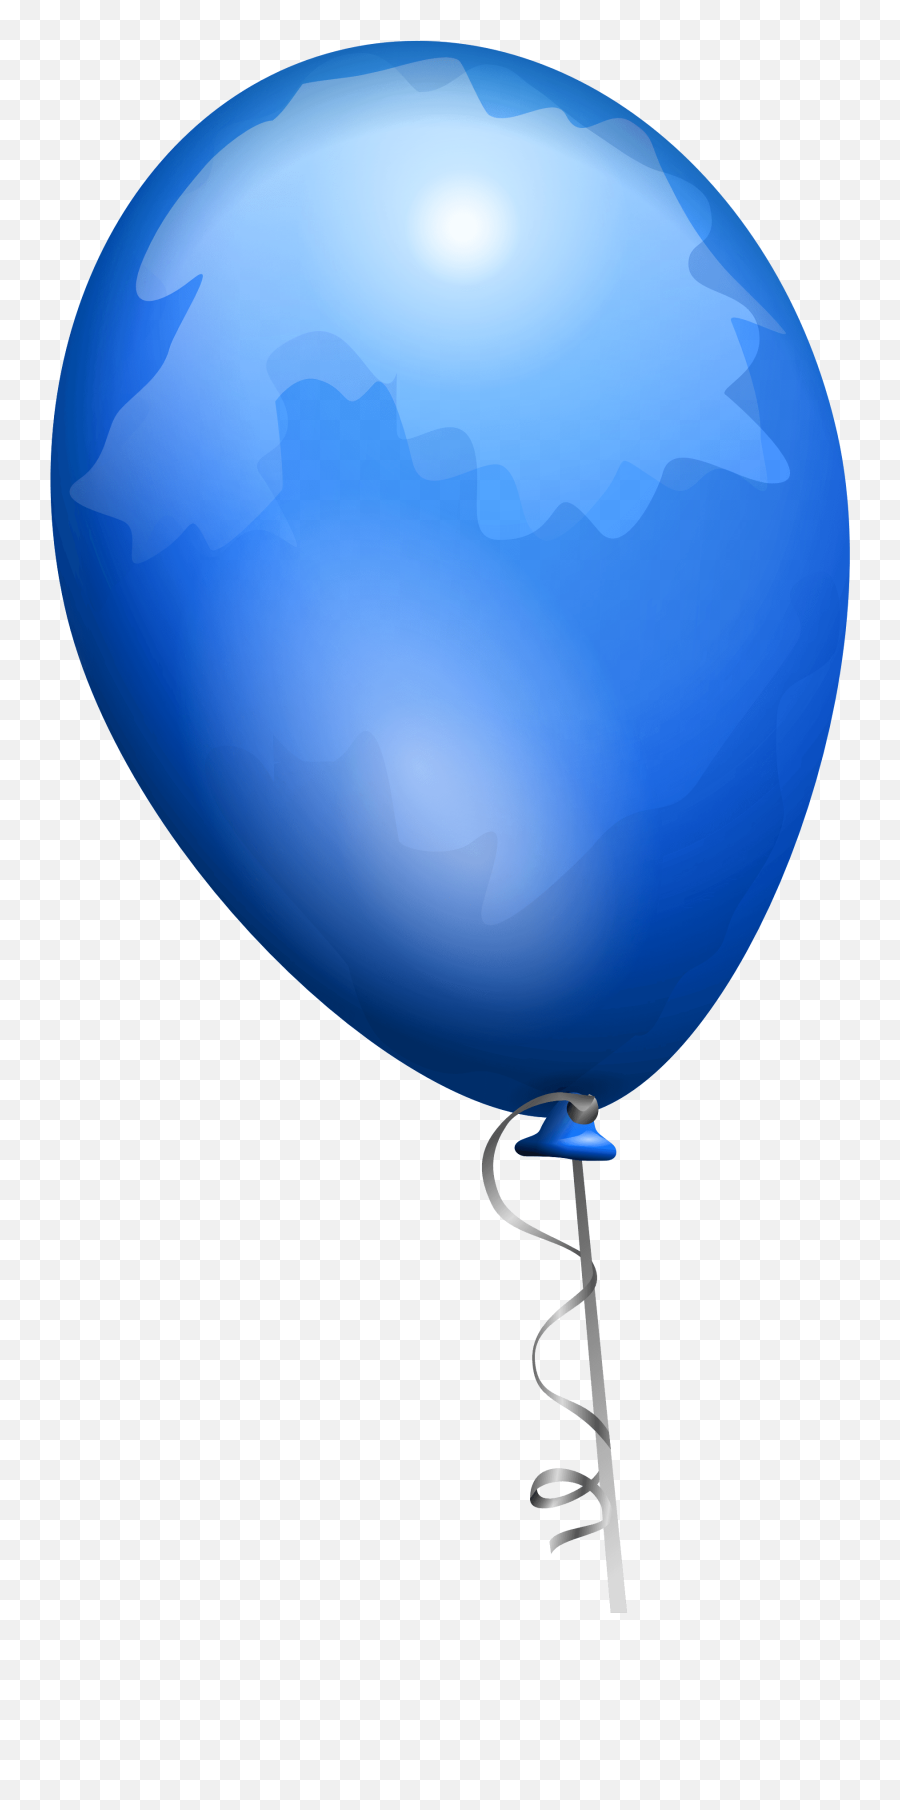 Download Red Balloon Png Image - Balloon Clip Art,Red Balloon Png